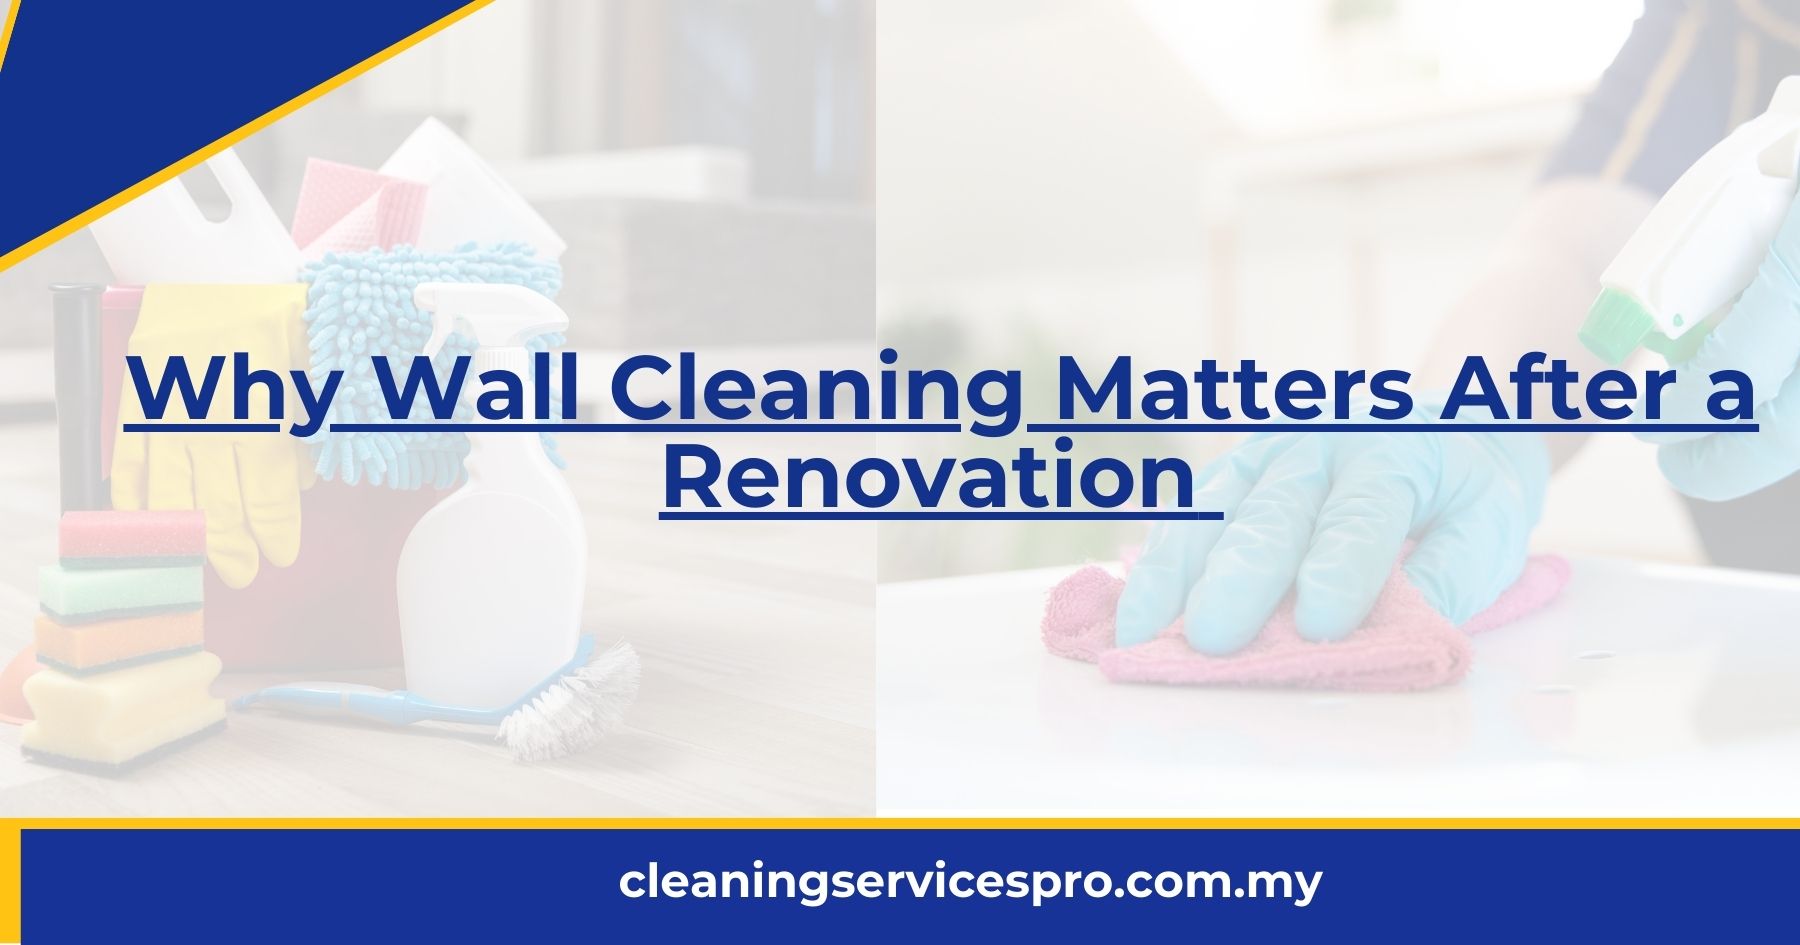 Why Wall Cleaning Matters After a Renovation